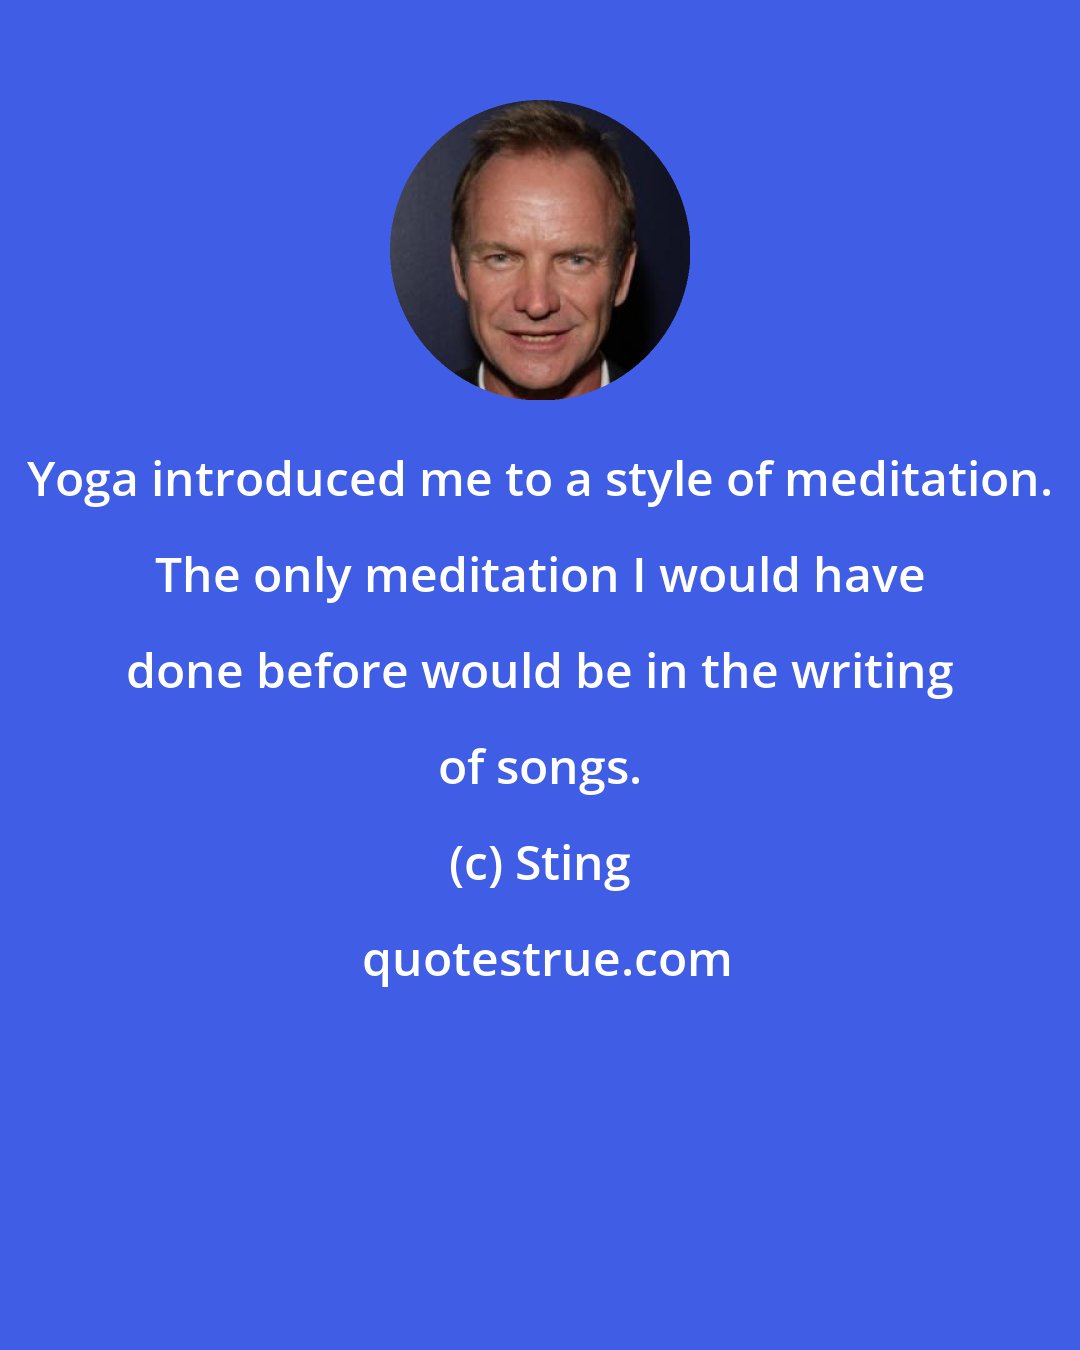 Sting: Yoga introduced me to a style of meditation. The only meditation I would have done before would be in the writing of songs.